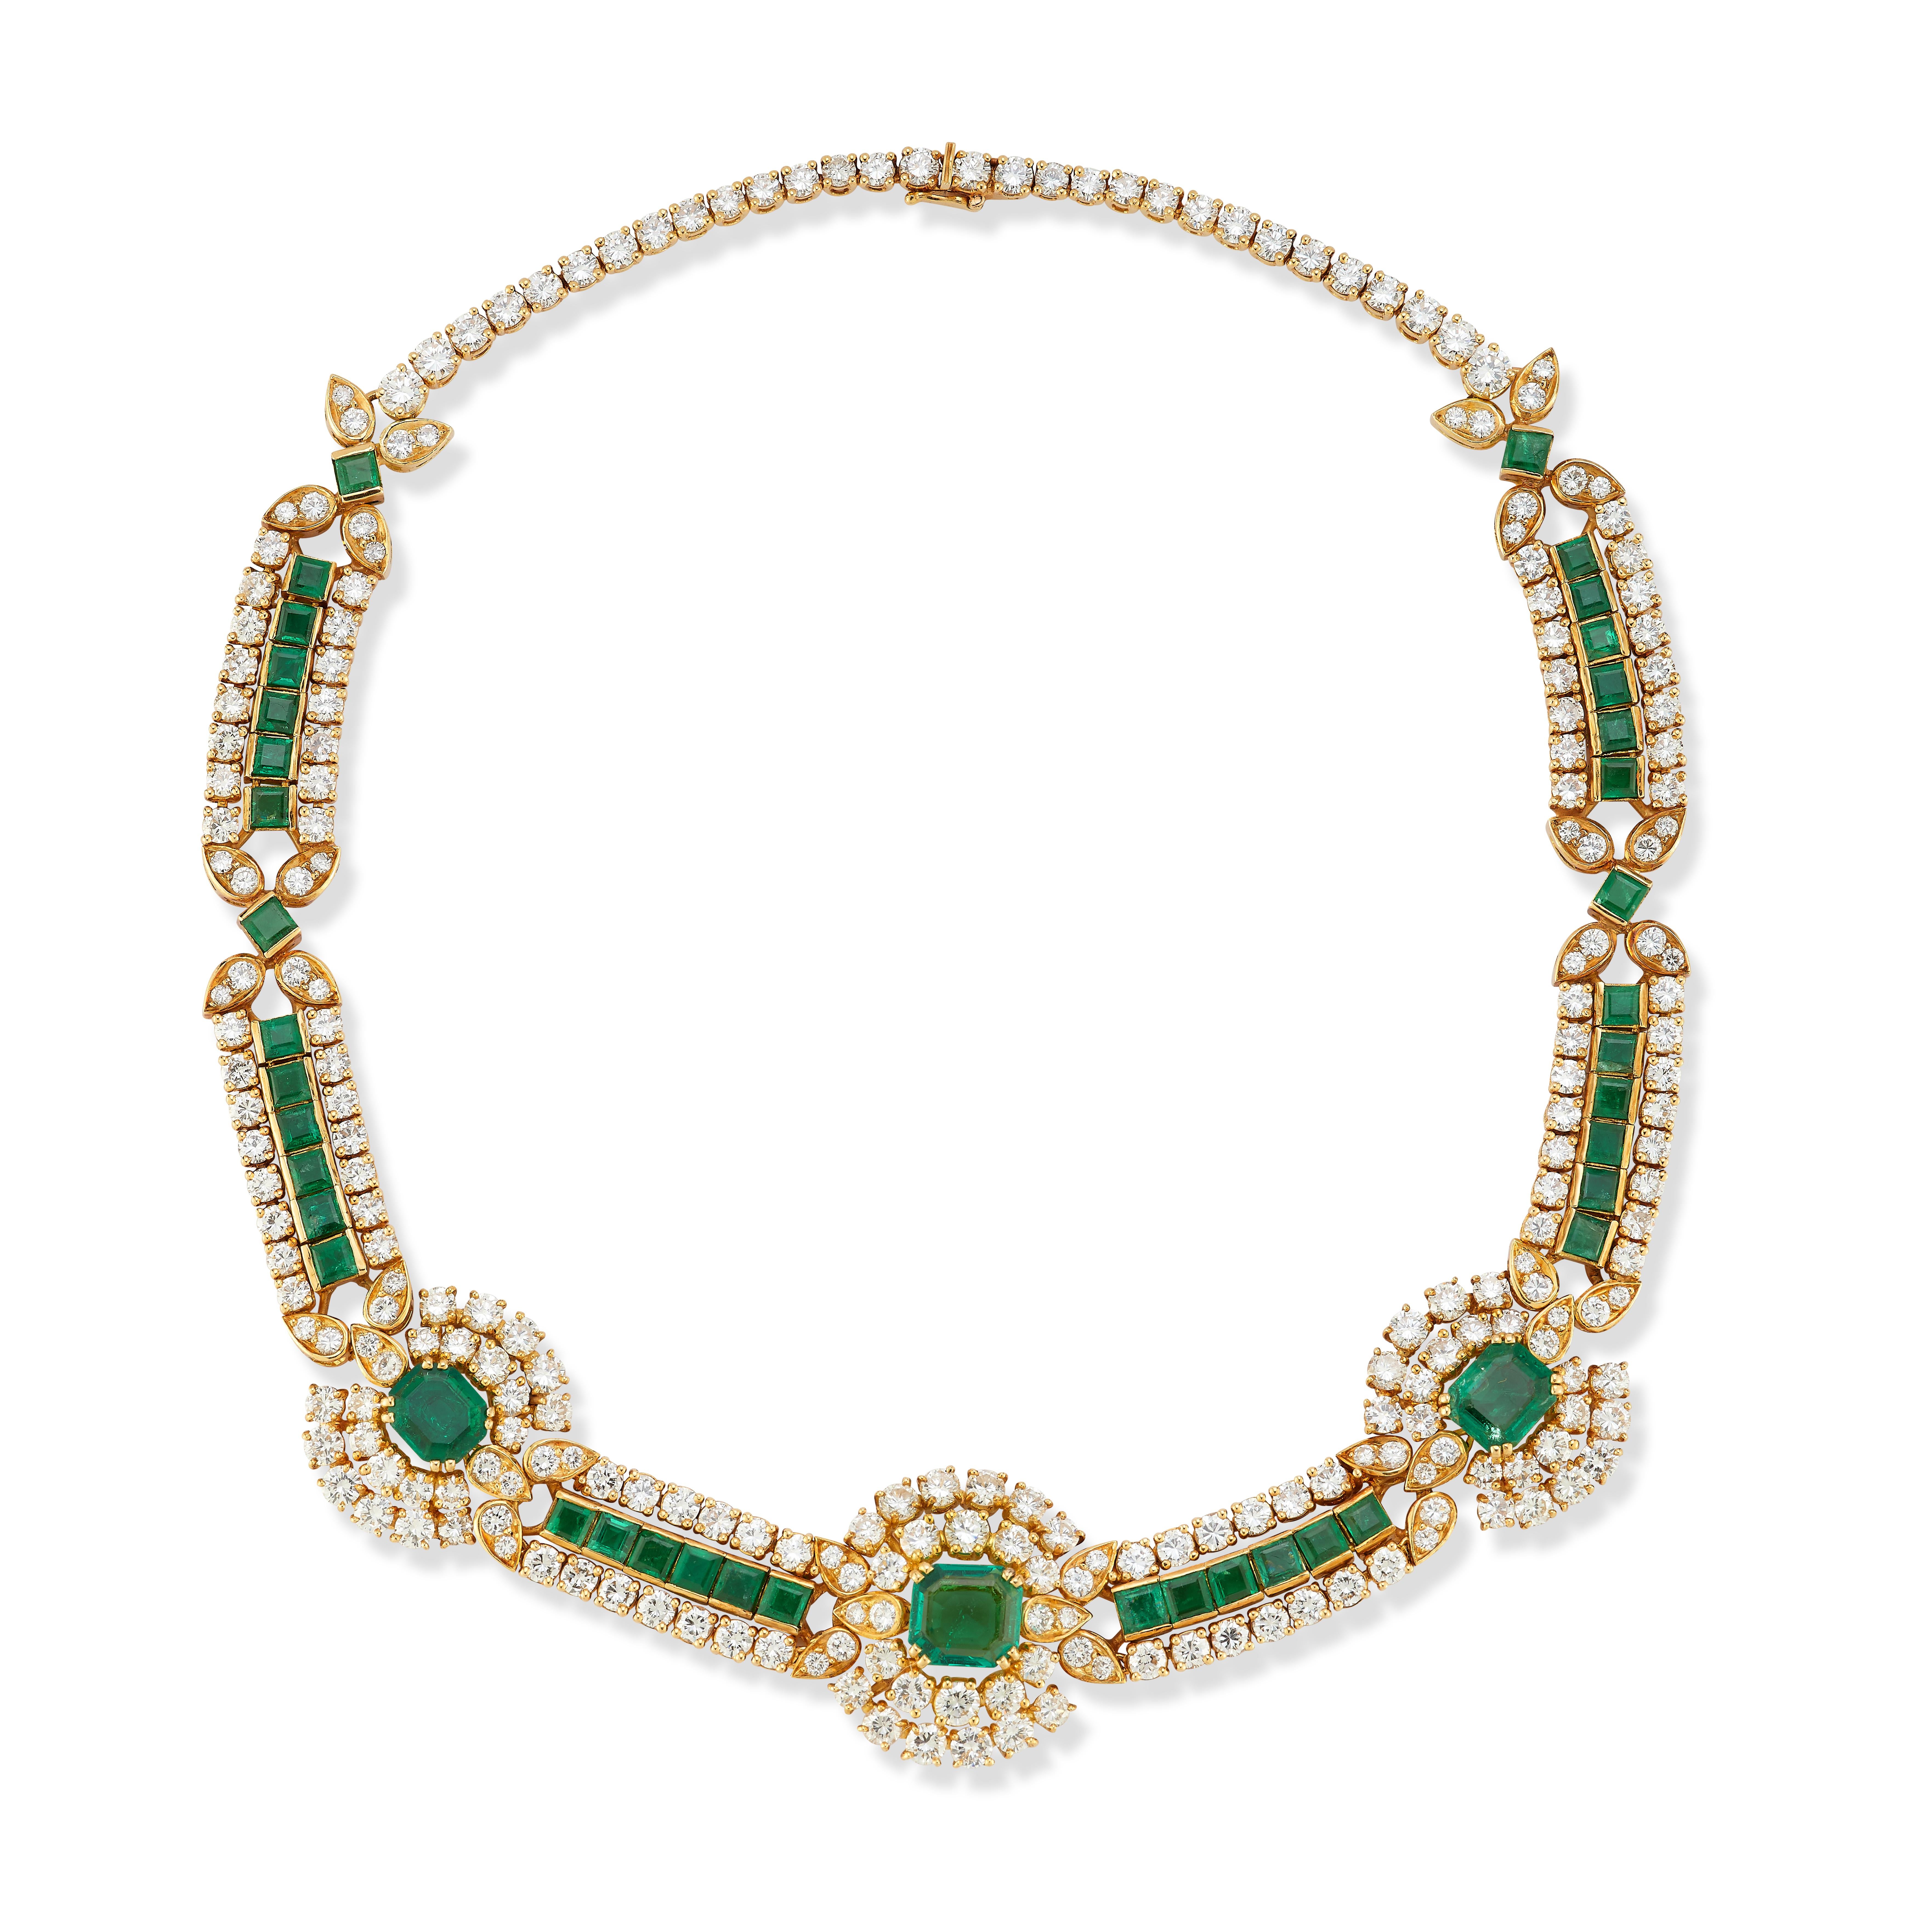 Van Cleef & Arpels Diamond & Emerald Necklace

Featuring three rows adorned with round-cut diamonds and square-cut emeralds. 

Signed: Van Cleef & Arpels and numbered, French maker's mark
Stamped: Made in France

Length: 15